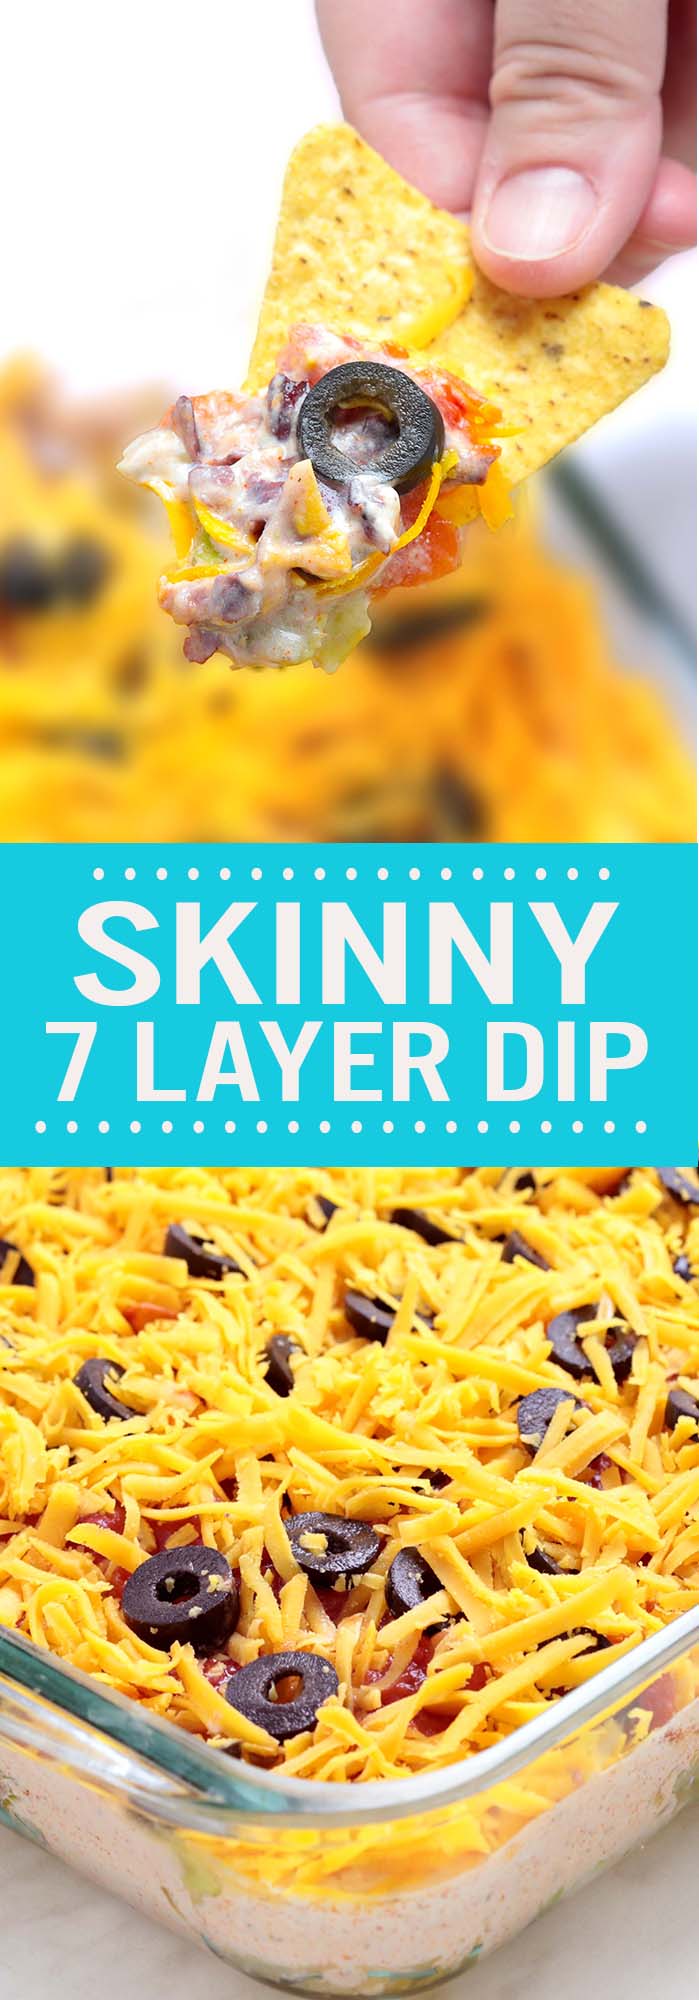 Skinny 7 Layer Dip - A must have at every large get together: birthdays, football, holidays.....